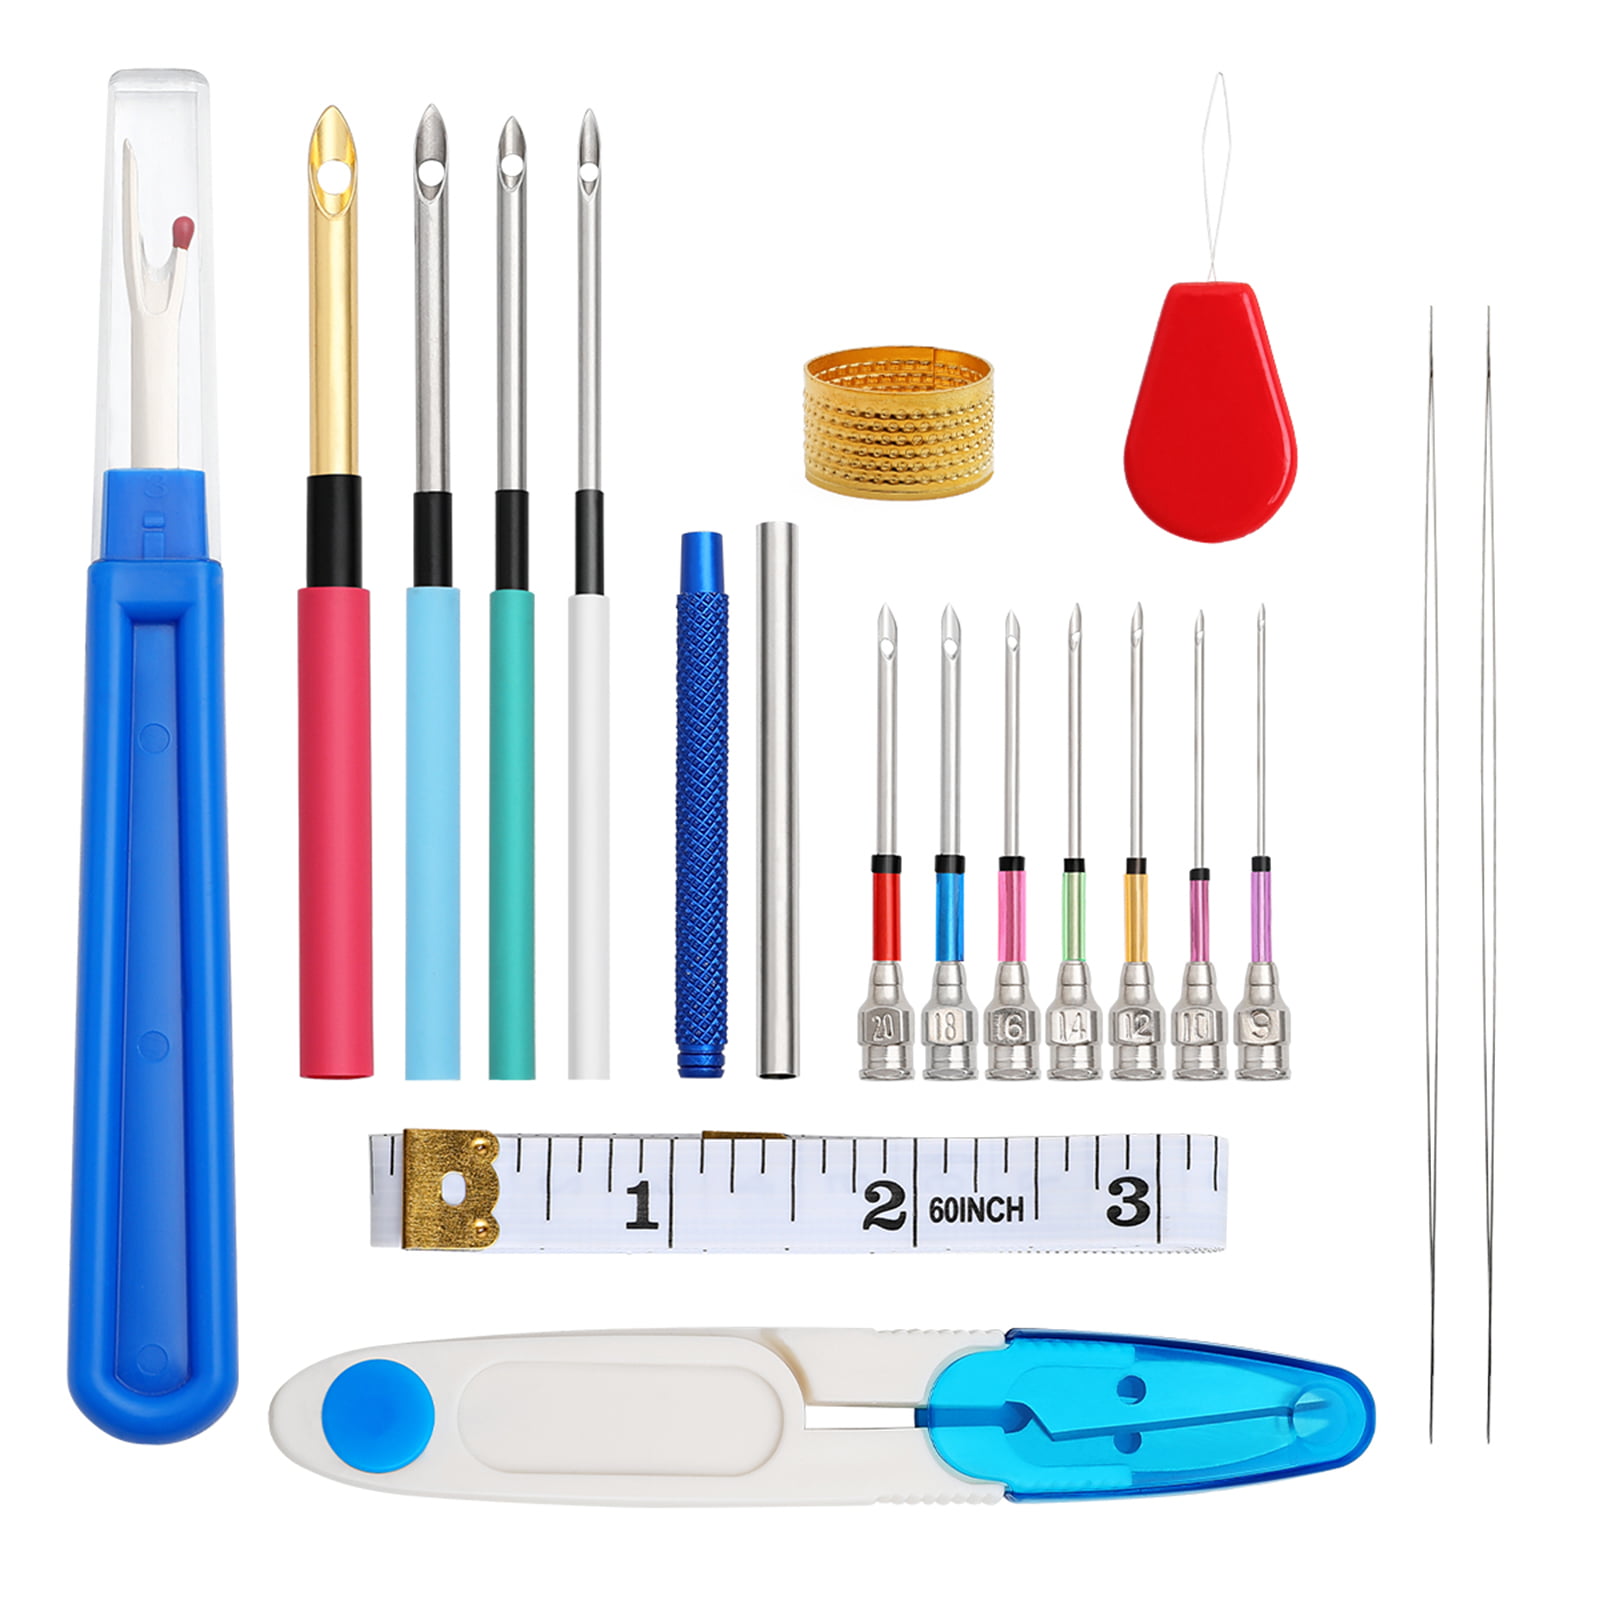 Pagow PAGOW Sewing Seam Ripper Kit, Sewing Thread Removers